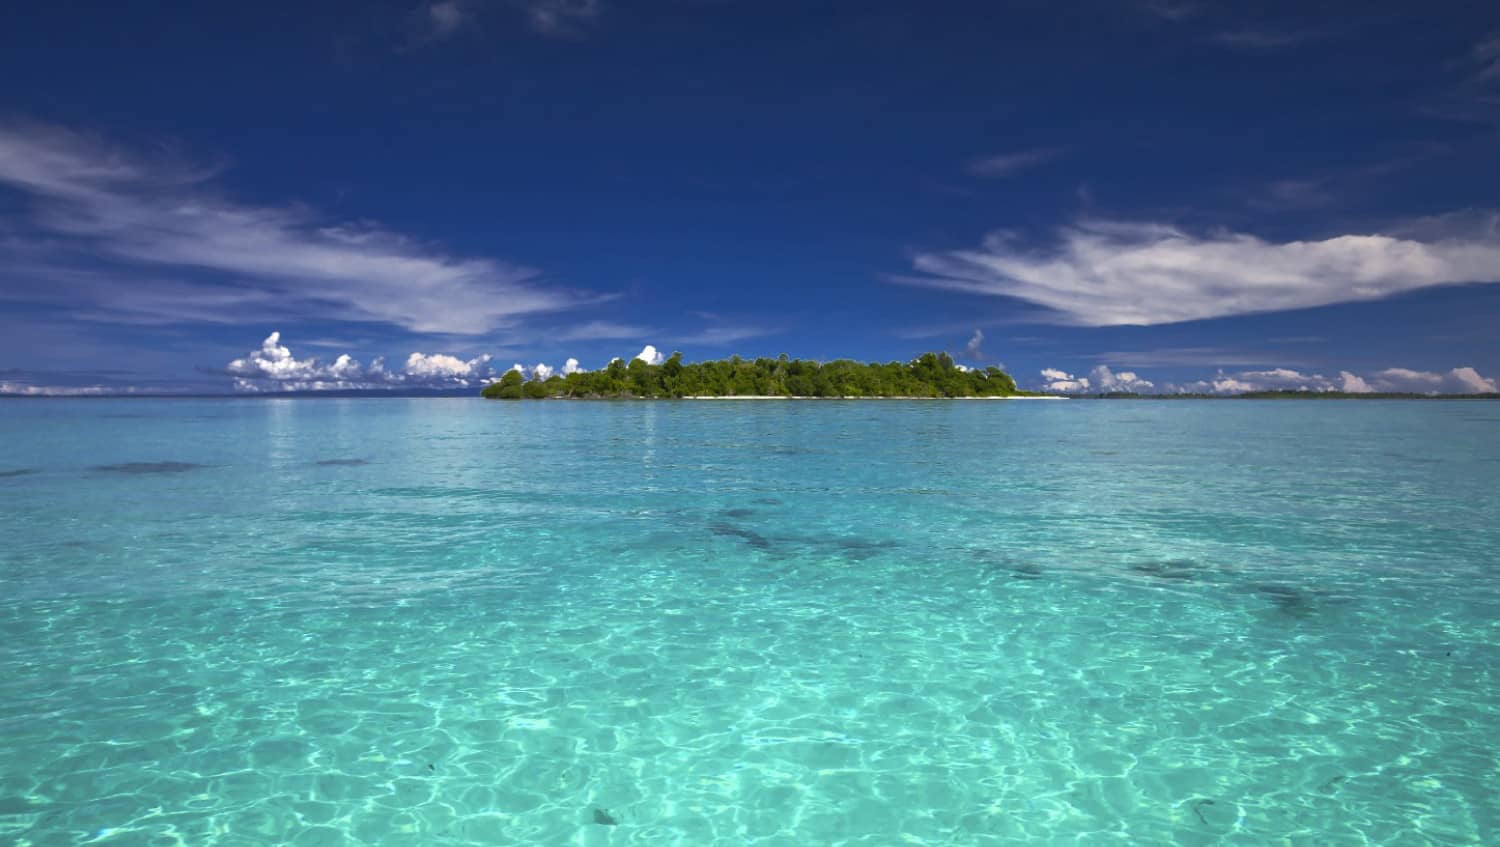 Landscape of an island, a blue sky and crystal clear sea water